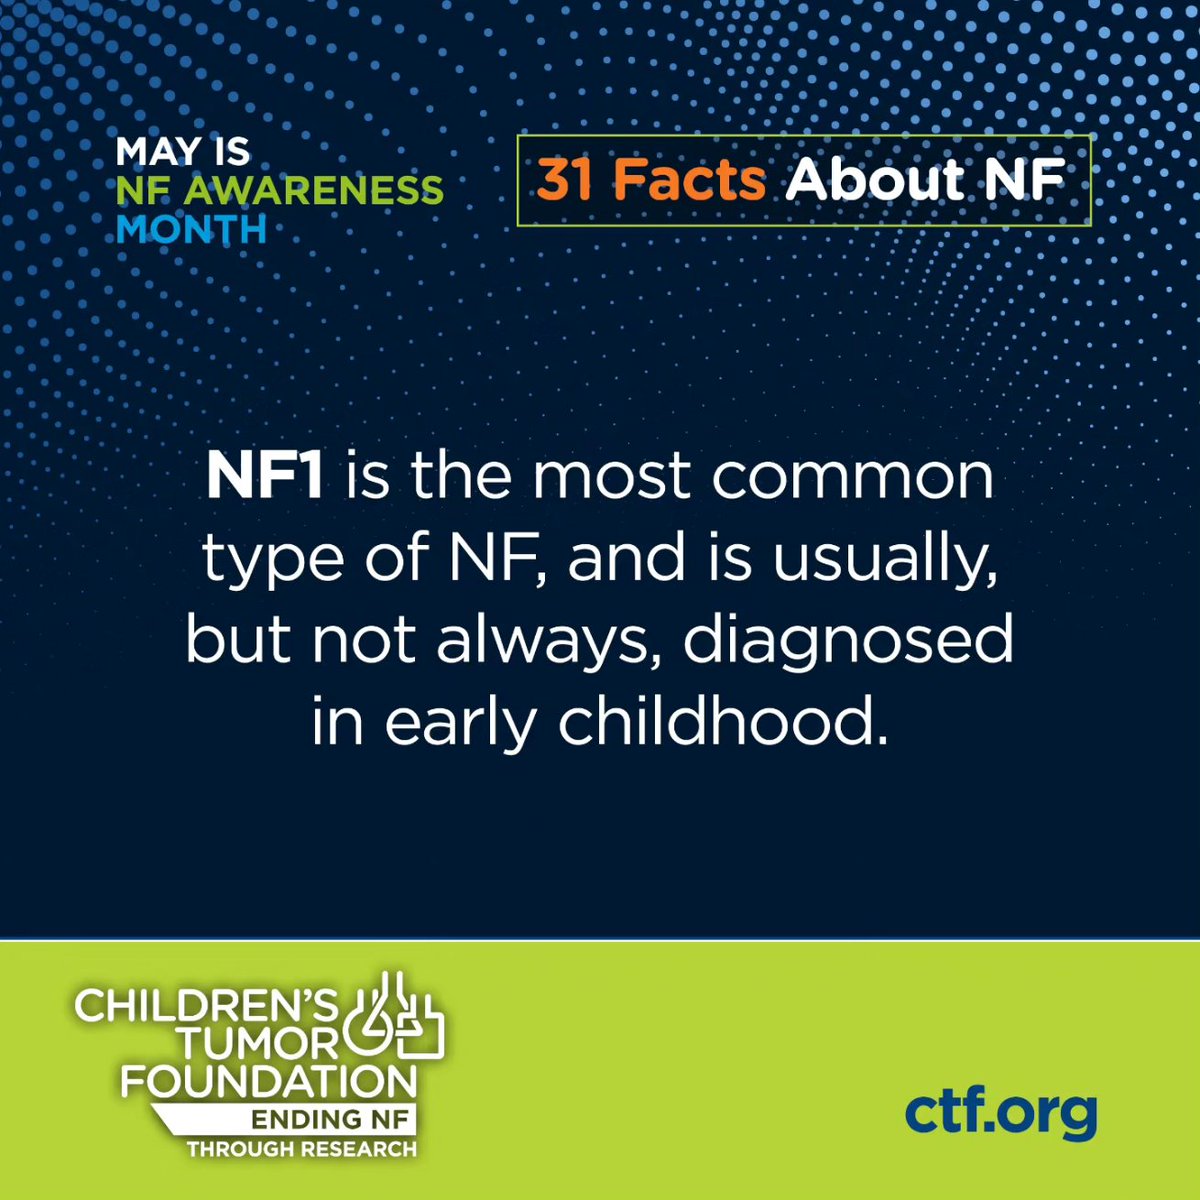 T was about this age when he was diagnosed with NF1, no one had any idea on how it would impact his and our lives.

#imwithTravis #ikNowaFighter #MoreNotLess #makeNFvisible #EndNF